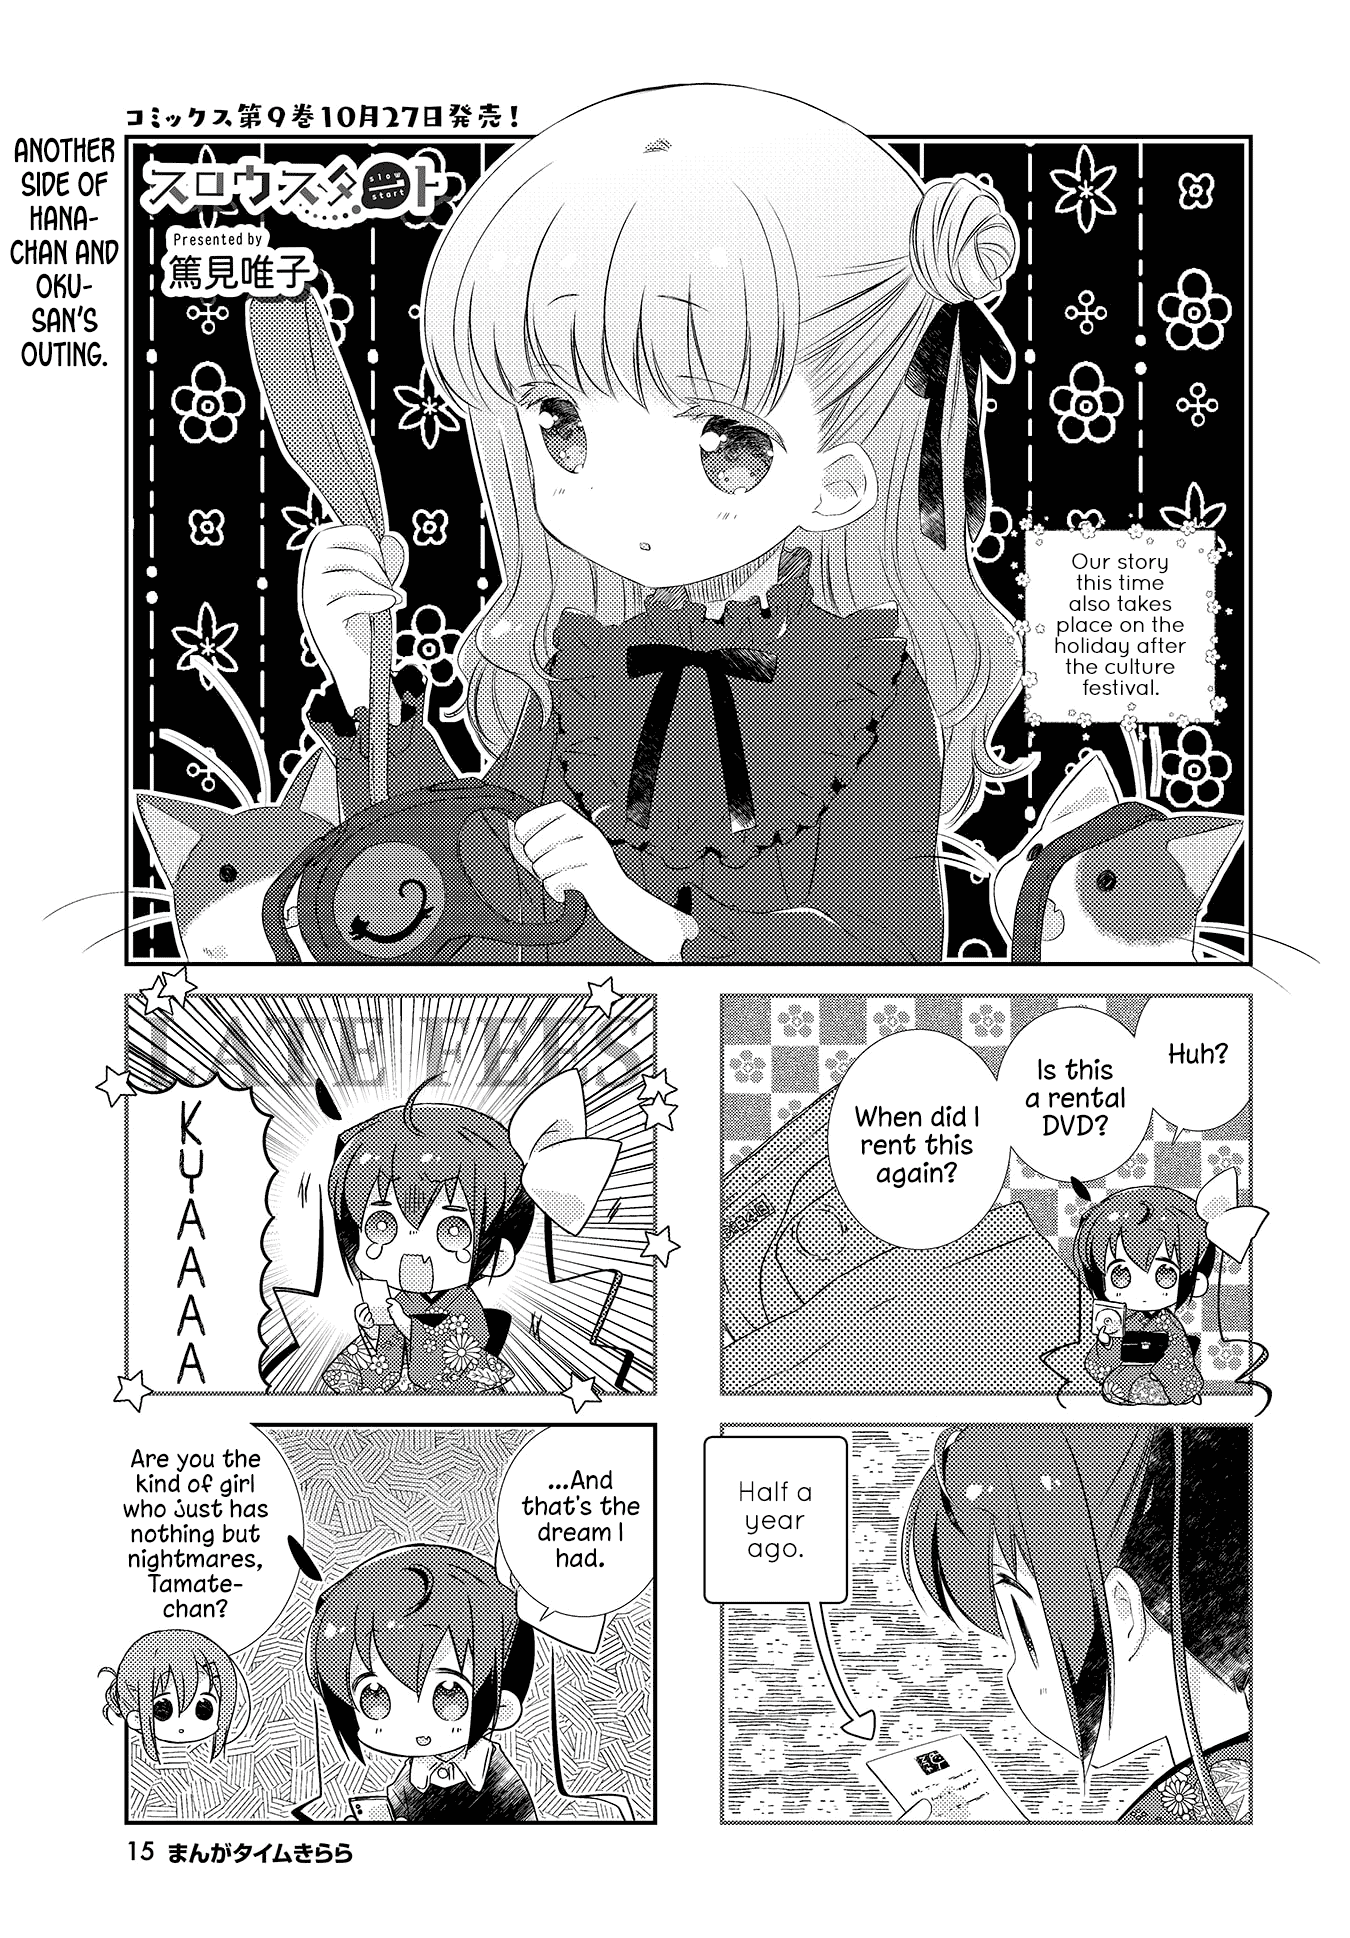 Slow Start - 112 page 1-78bf2483